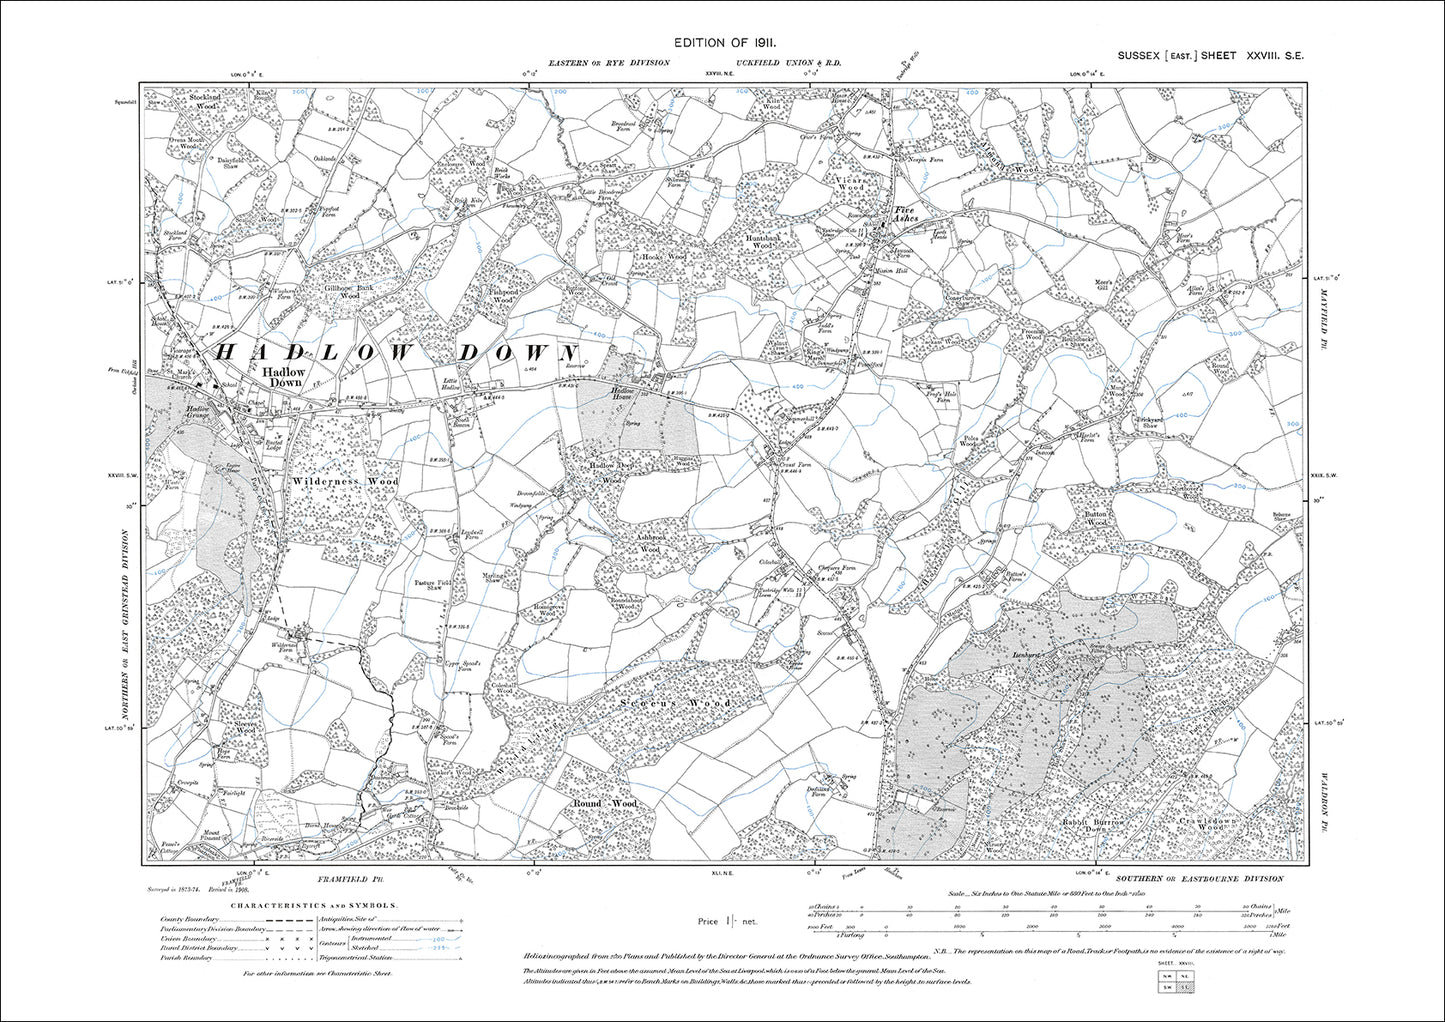 Hadlow Down, Five Ashes, old map Sussex 1911: 28SE